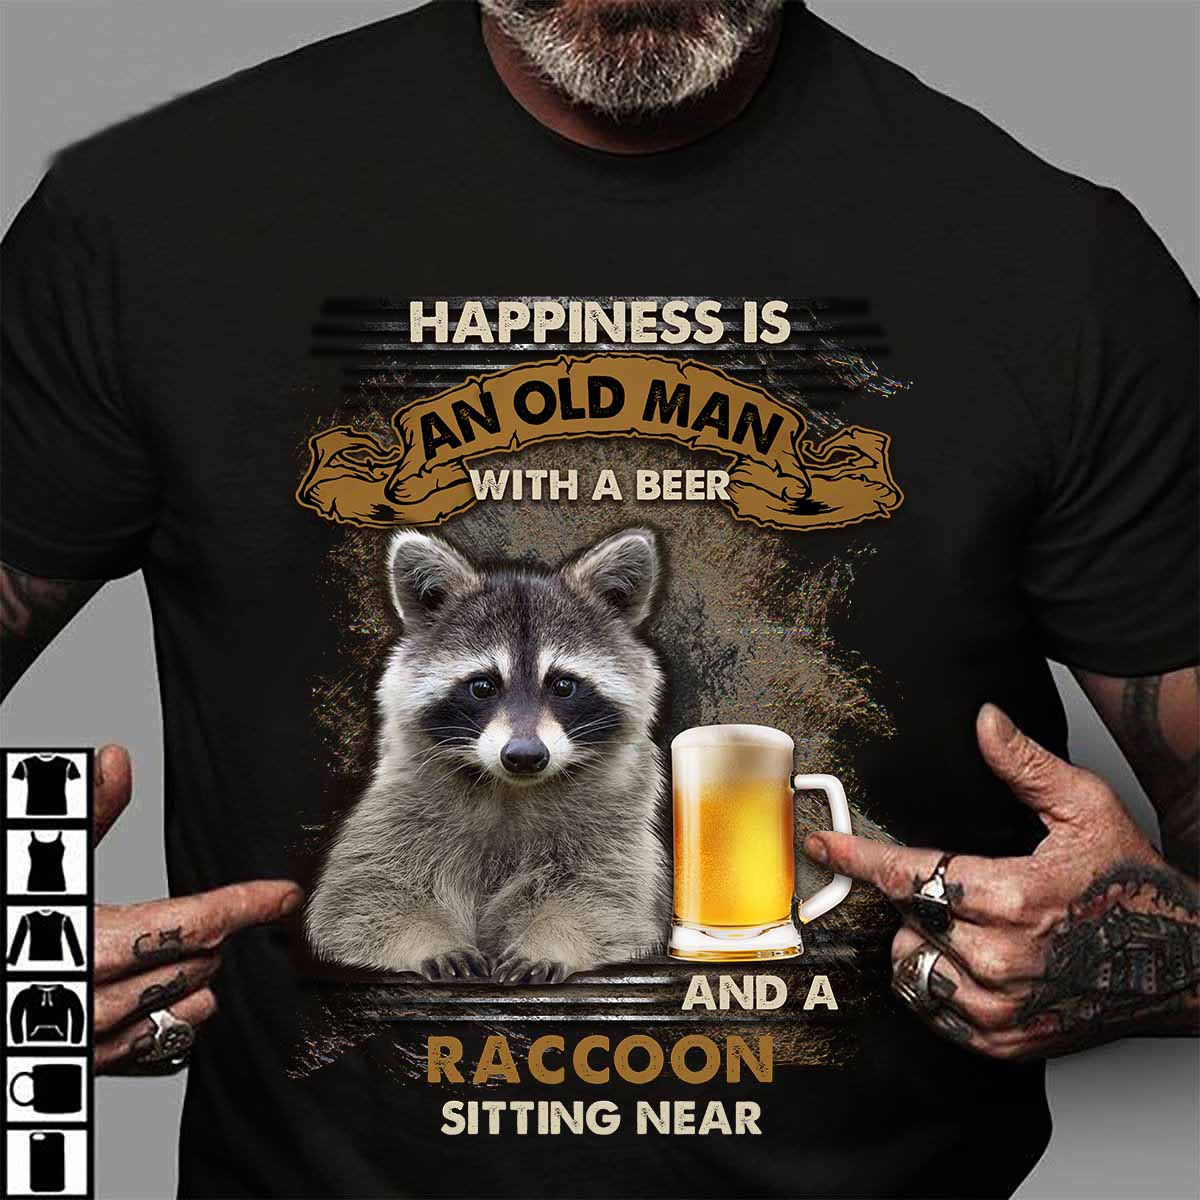 Happiness is an old man with a beer and a raccoon sitting near - Beer lover